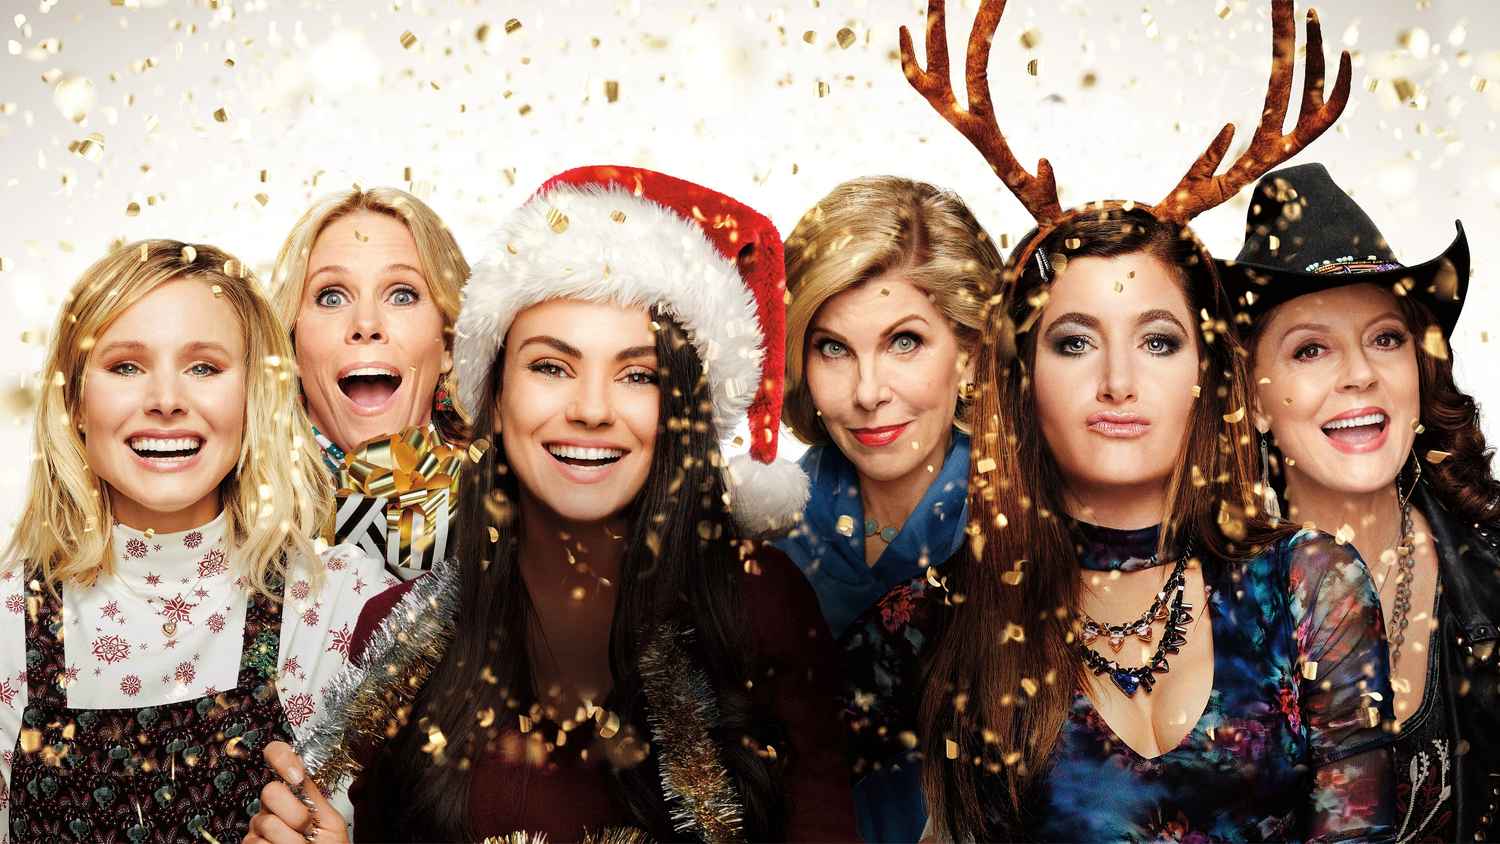 A Bad Moms Christmas Movie online with release date, trailer, cast and song...